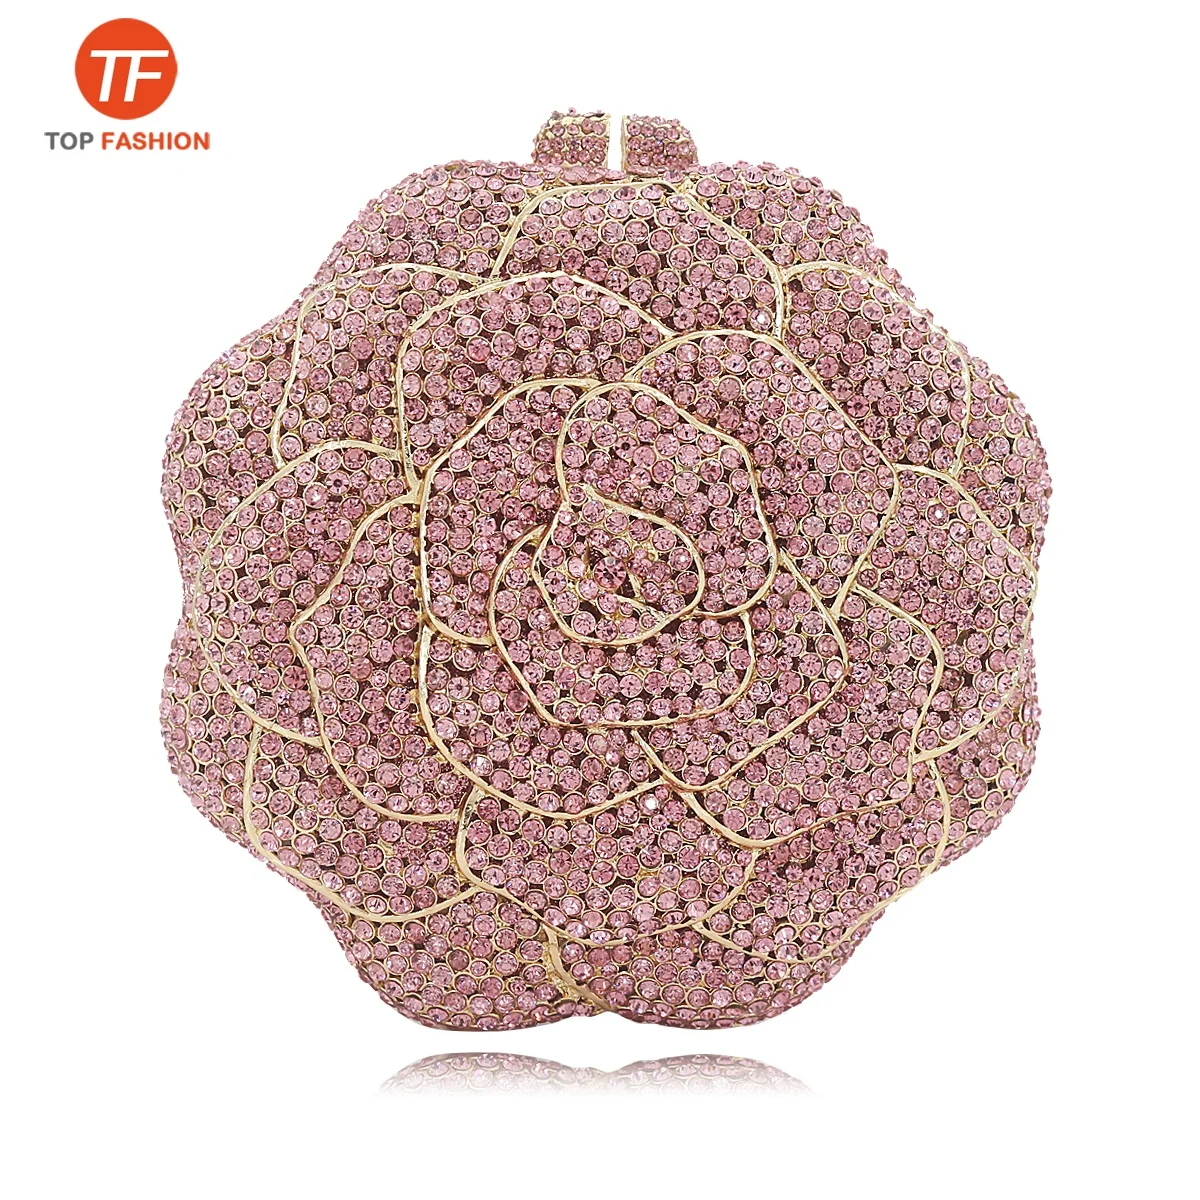 

China Factory Wholesales Luxury Crystal Rhinestone Clutch Evening Bag Wedding 3D Rose Hollow Out Purse, ( accept customized )